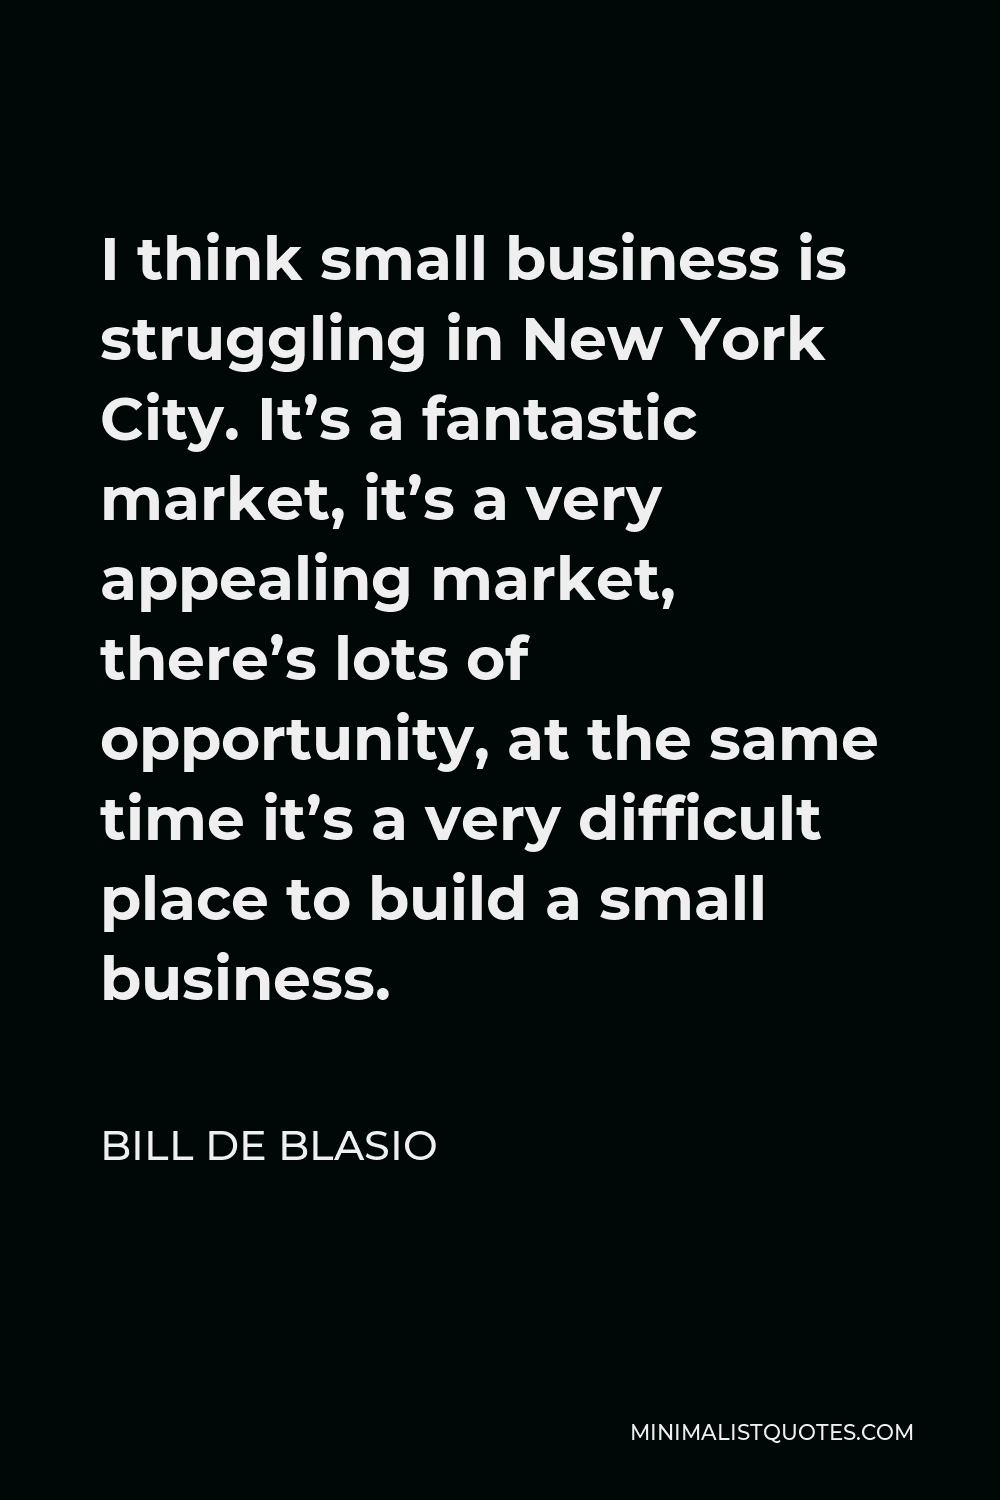 Bill de Blasio Quote - I think small business is struggling in New York City. It’s a fantastic market, it’s a very appealing market, there’s lots of opportunity, at the same time it’s a very difficult place to build a small business.